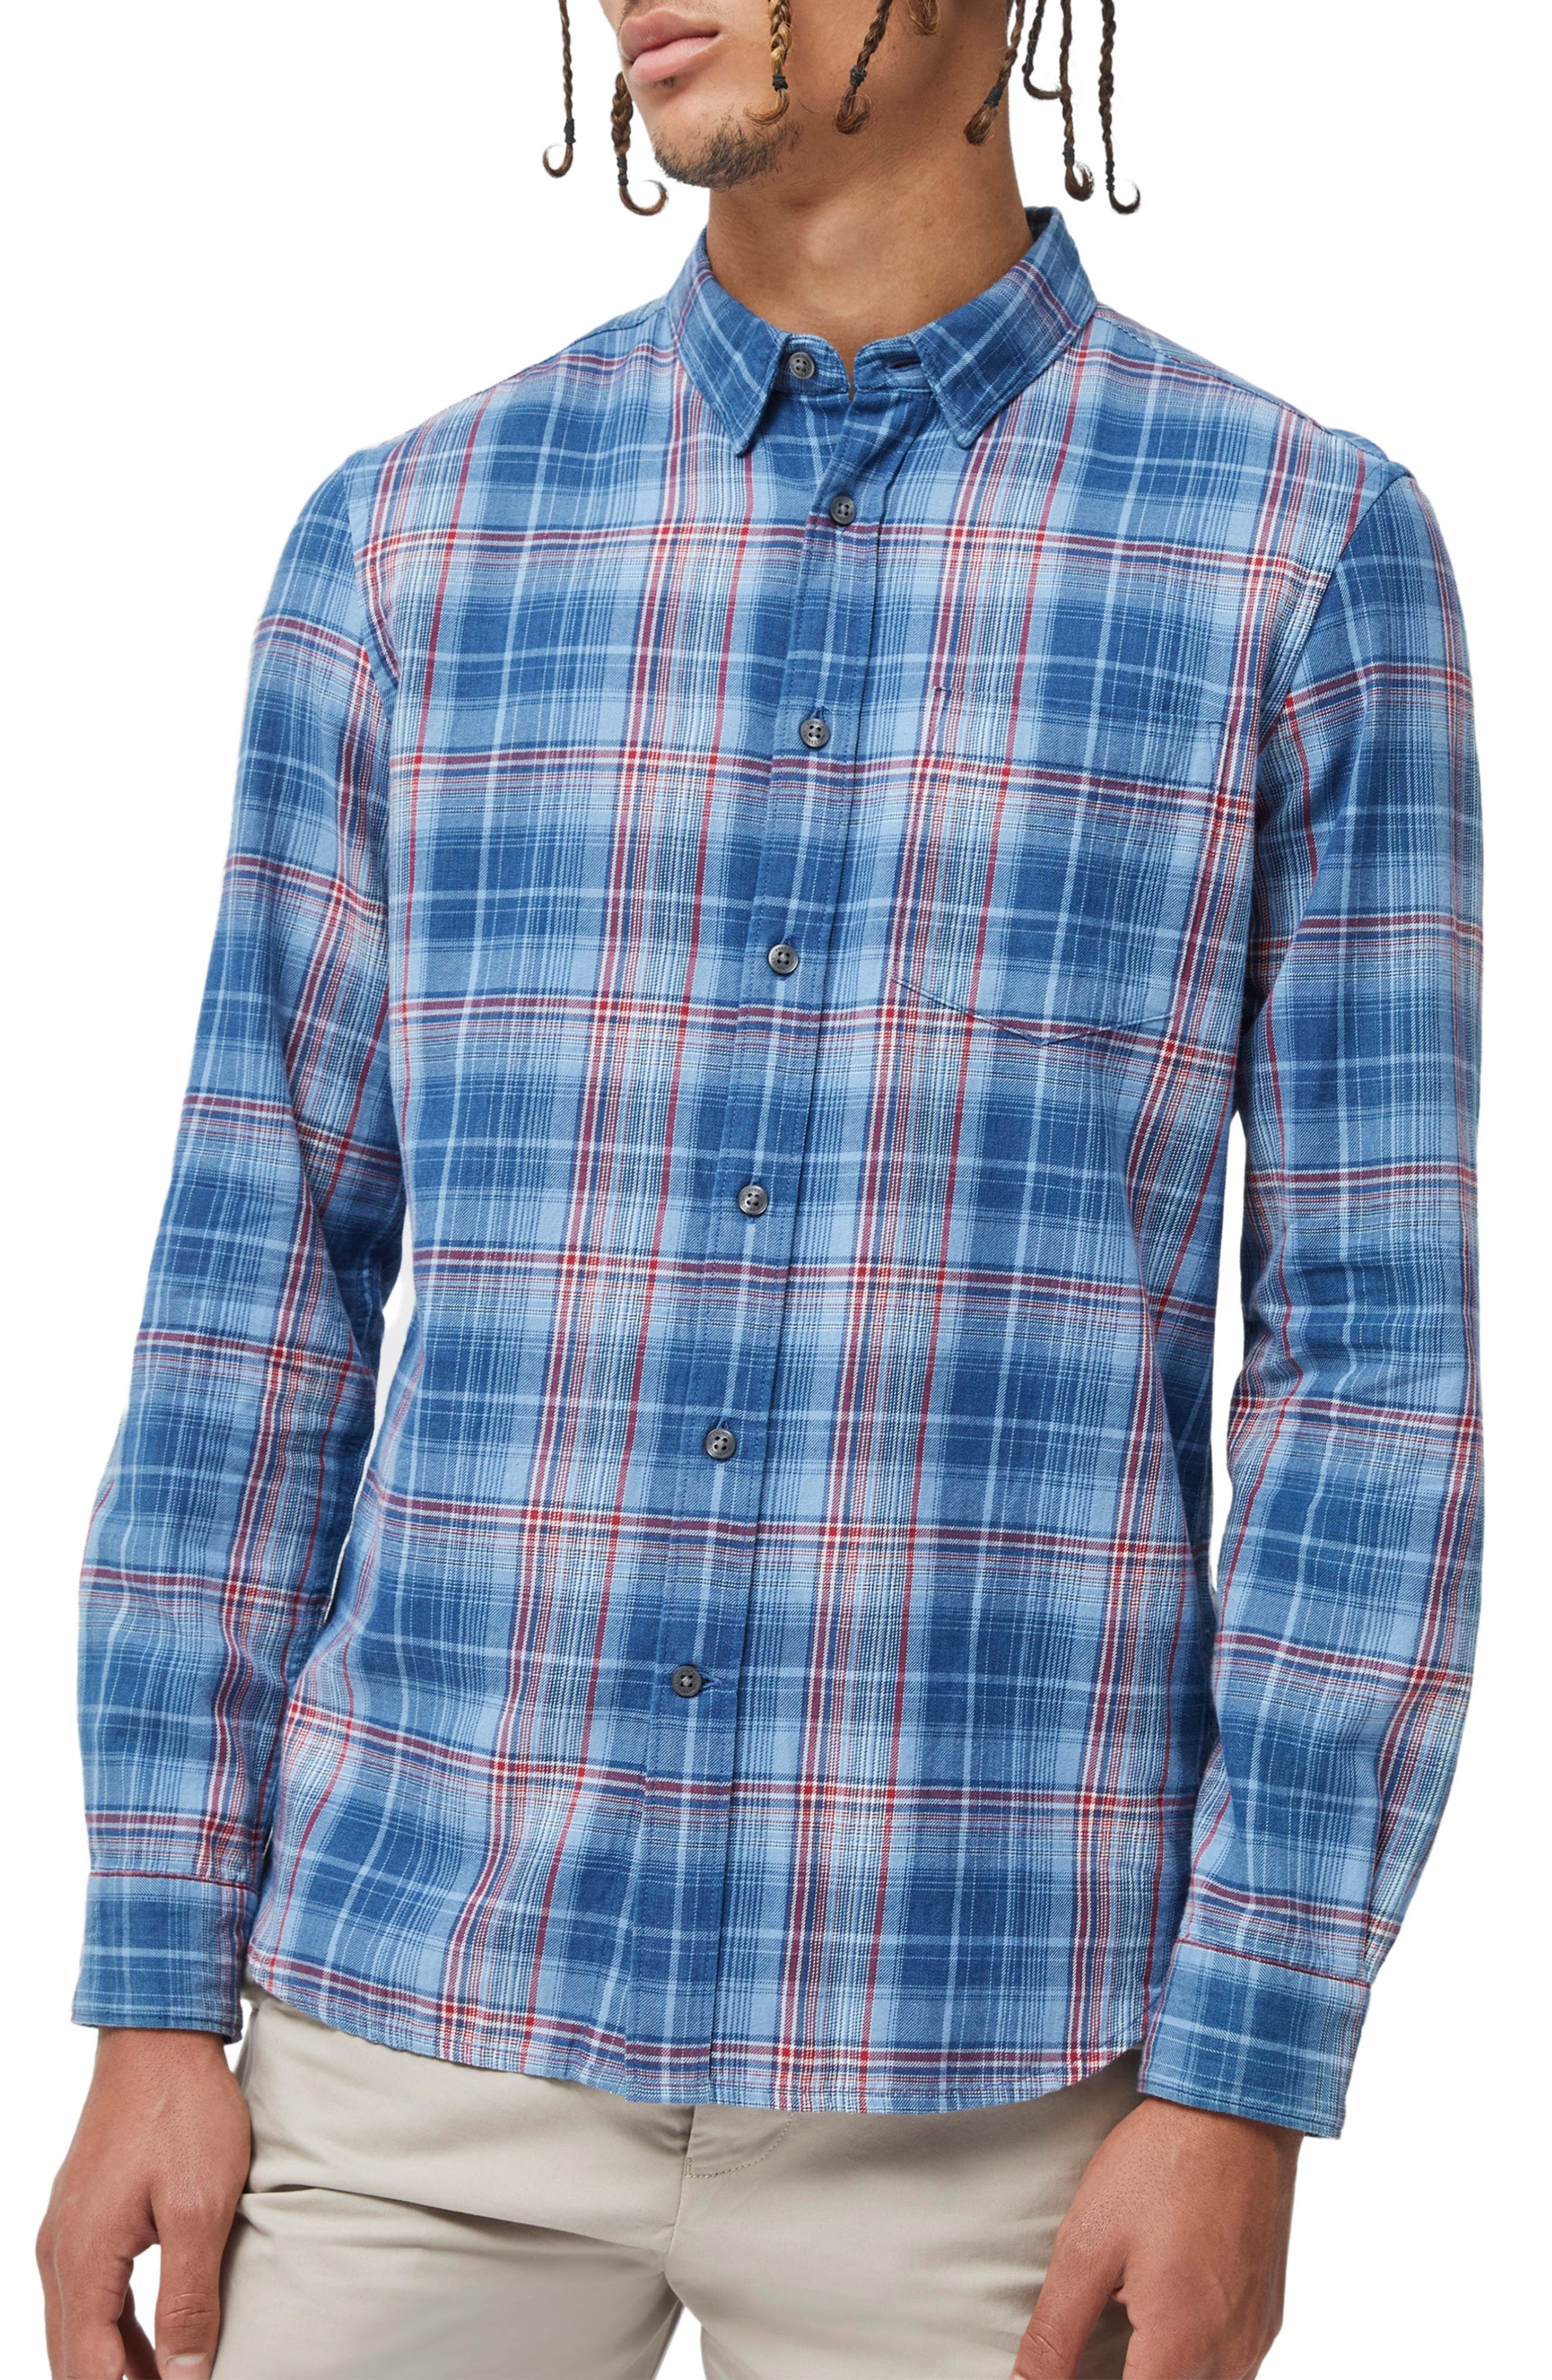 French Connection Mens Blue Check Print Casual Button-Down Shirt XS BHFO 4257 